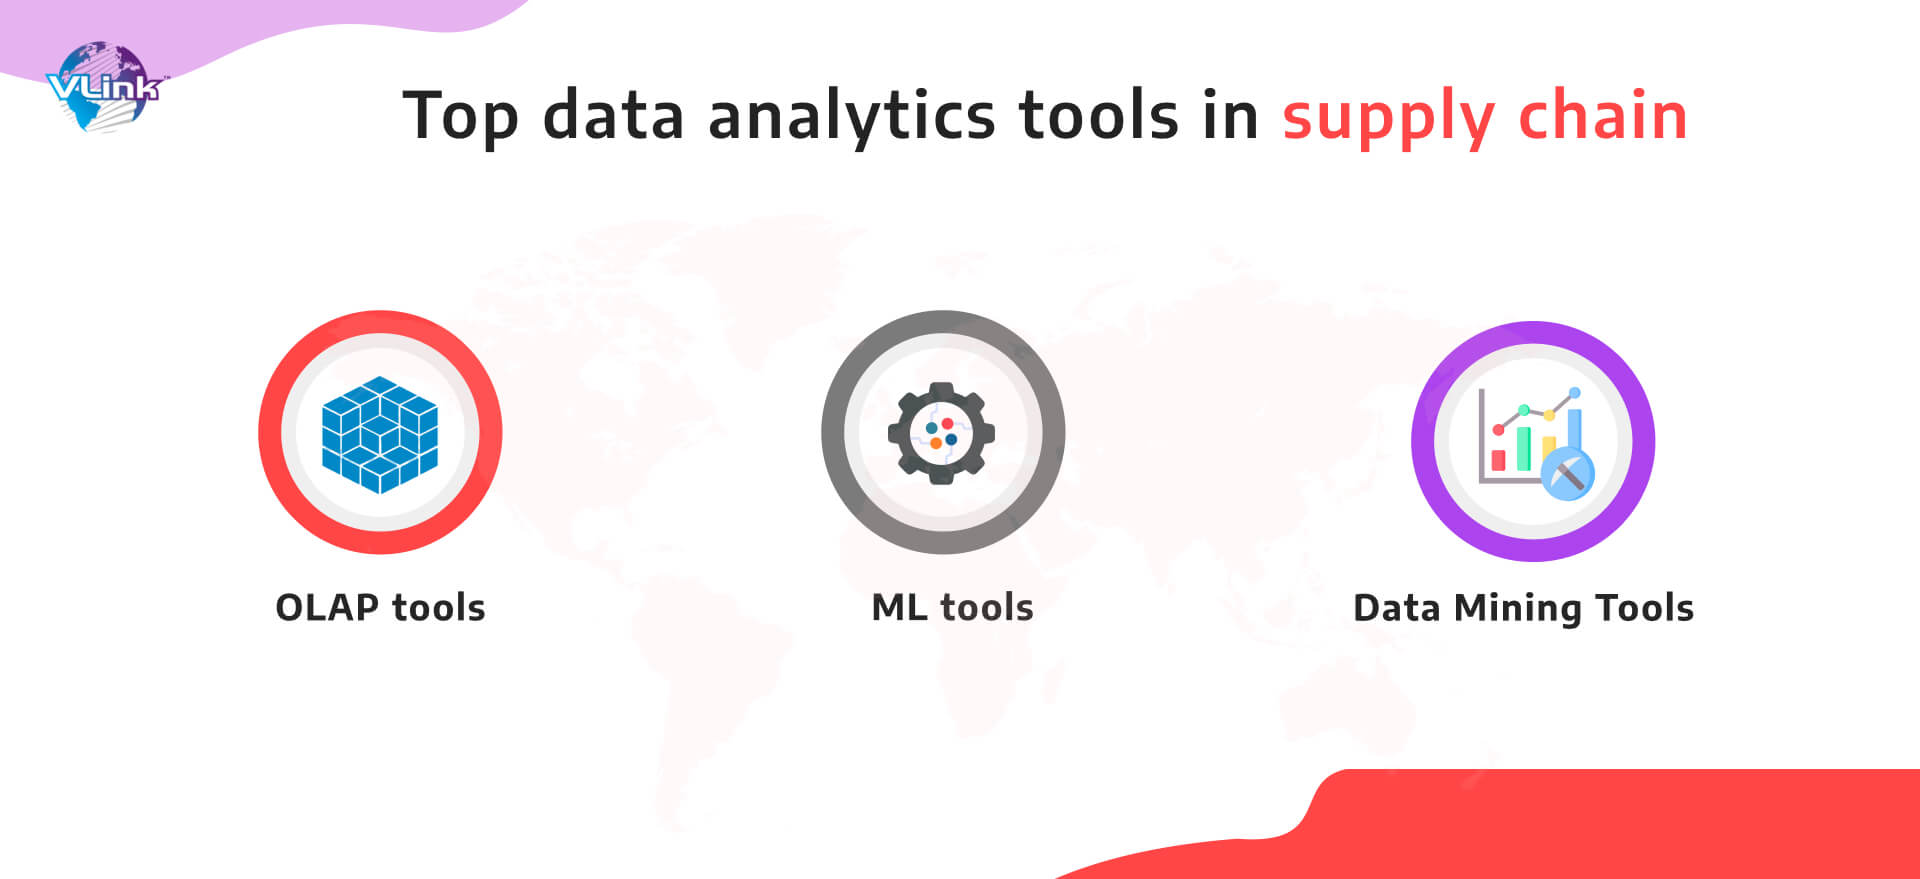 Top data analytics tools in supply chain